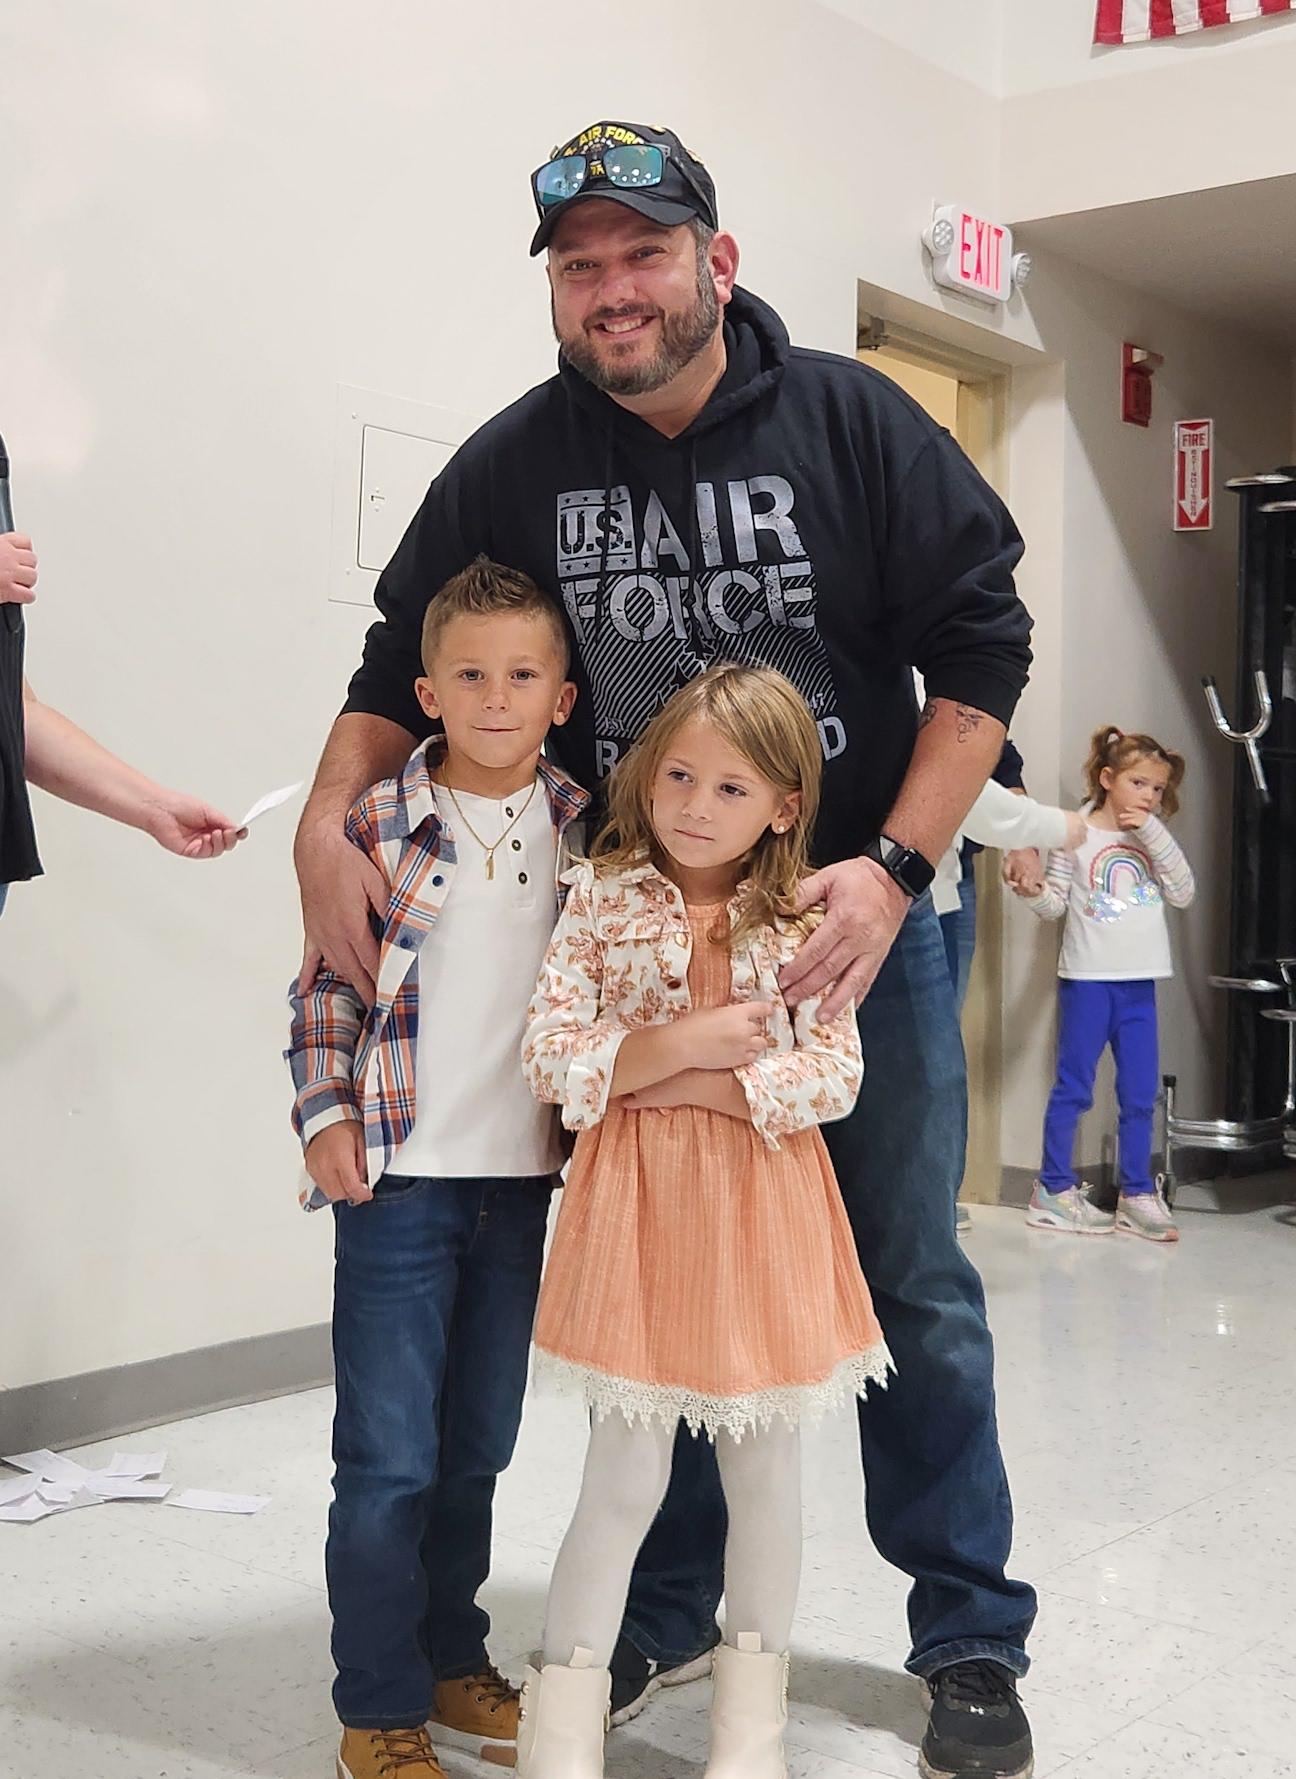 Students Roman and Sophia Napolitano were joined by their uncle, Anthony Napolitano (US Air Force Veteran)